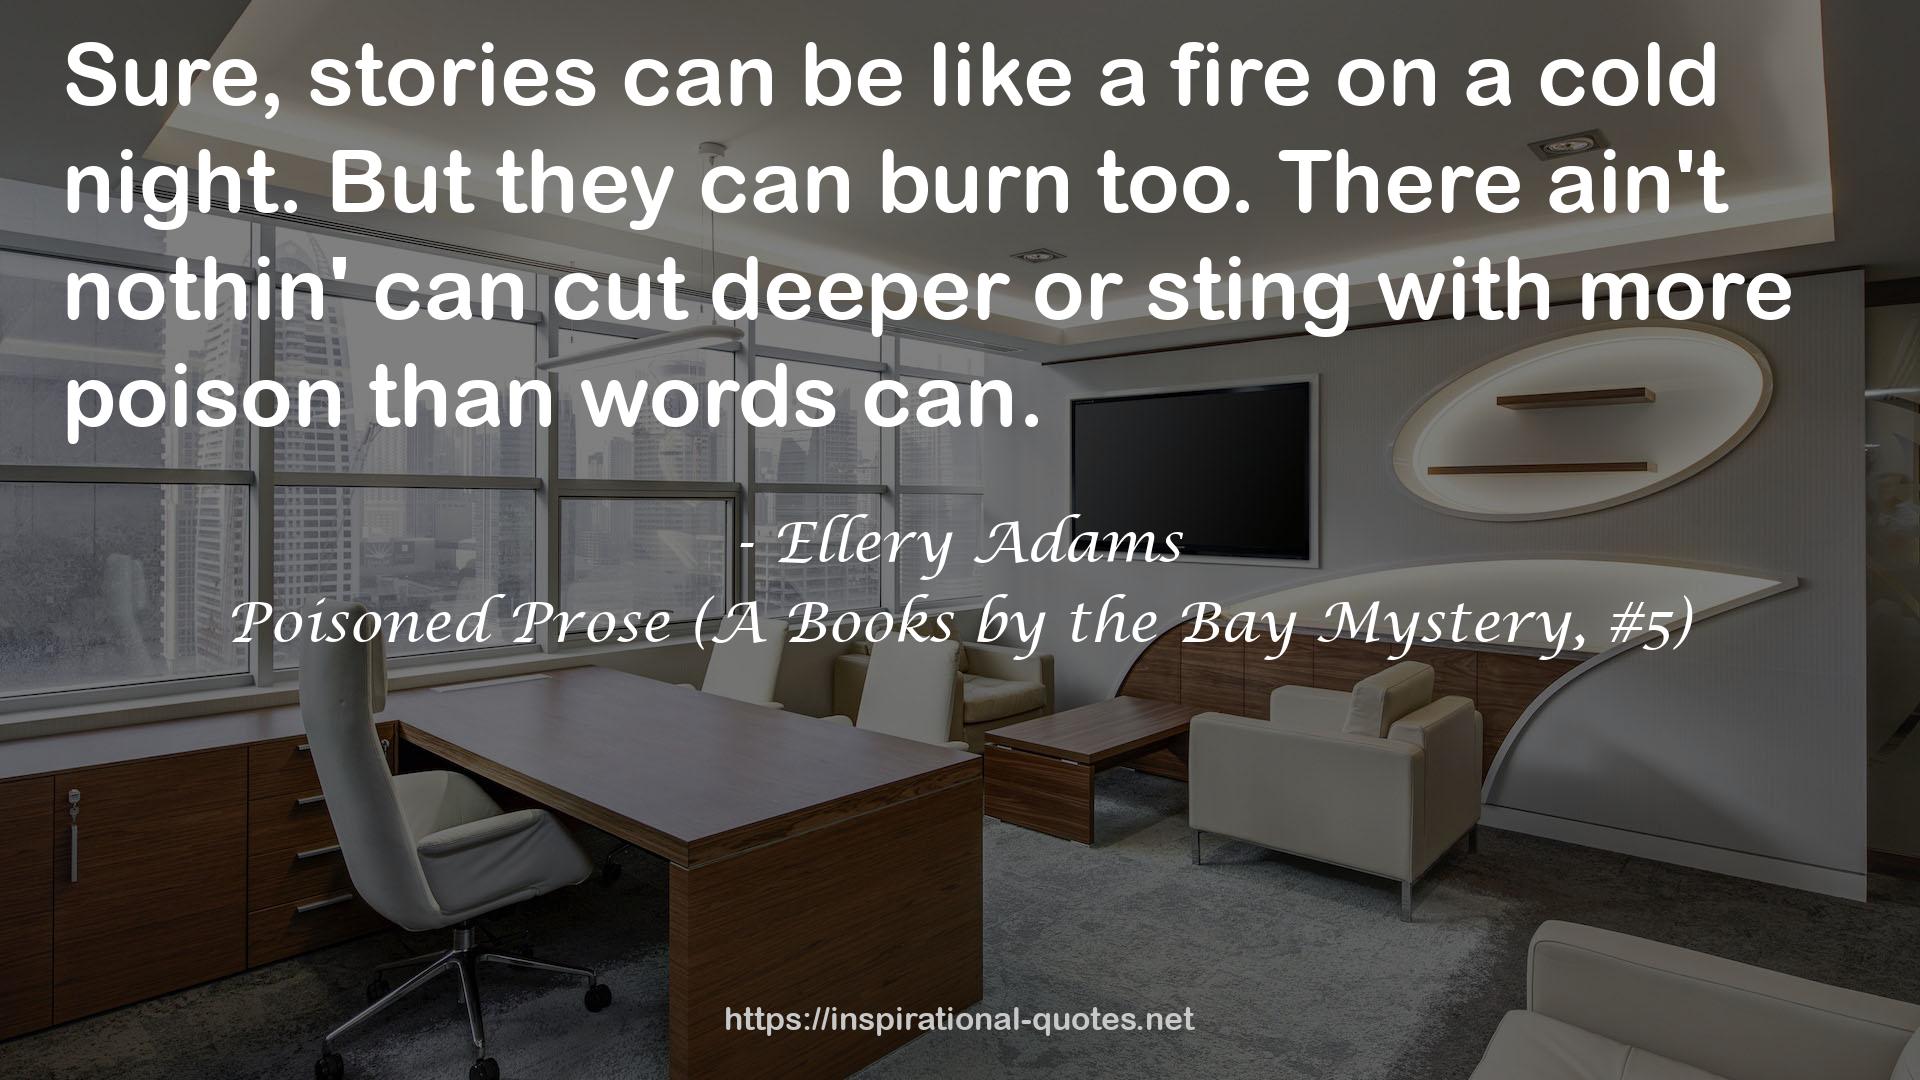 Poisoned Prose (A Books by the Bay Mystery, #5) QUOTES